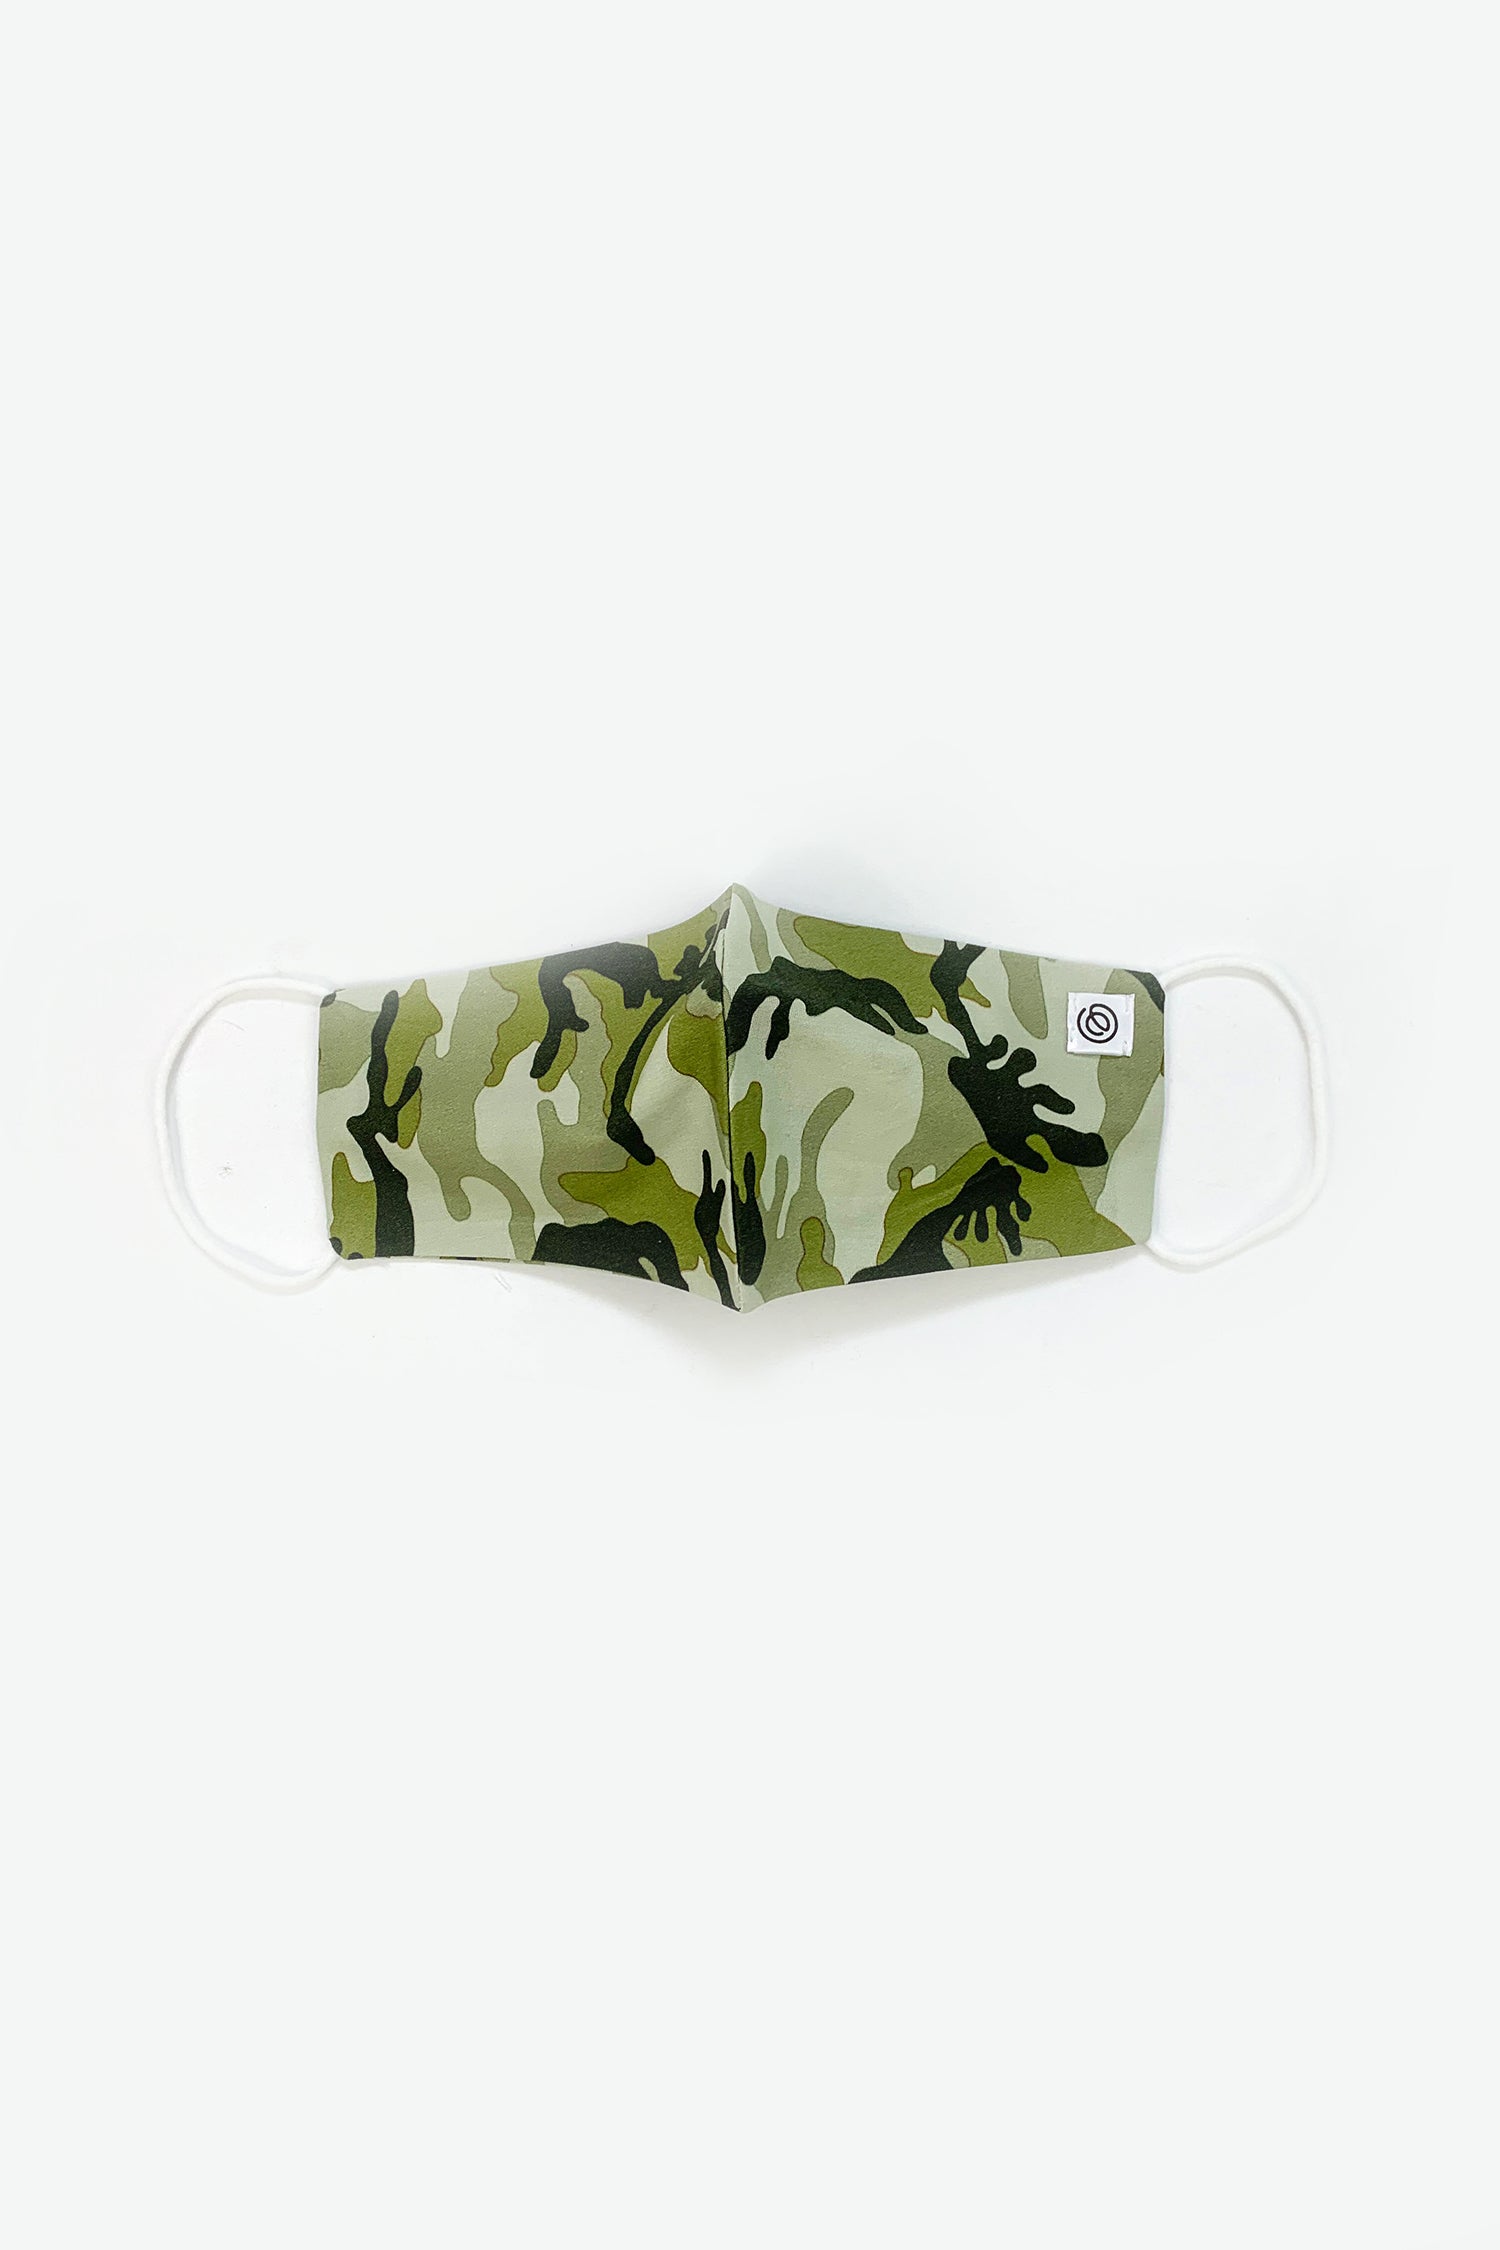 Full Face Mask in Green Camo